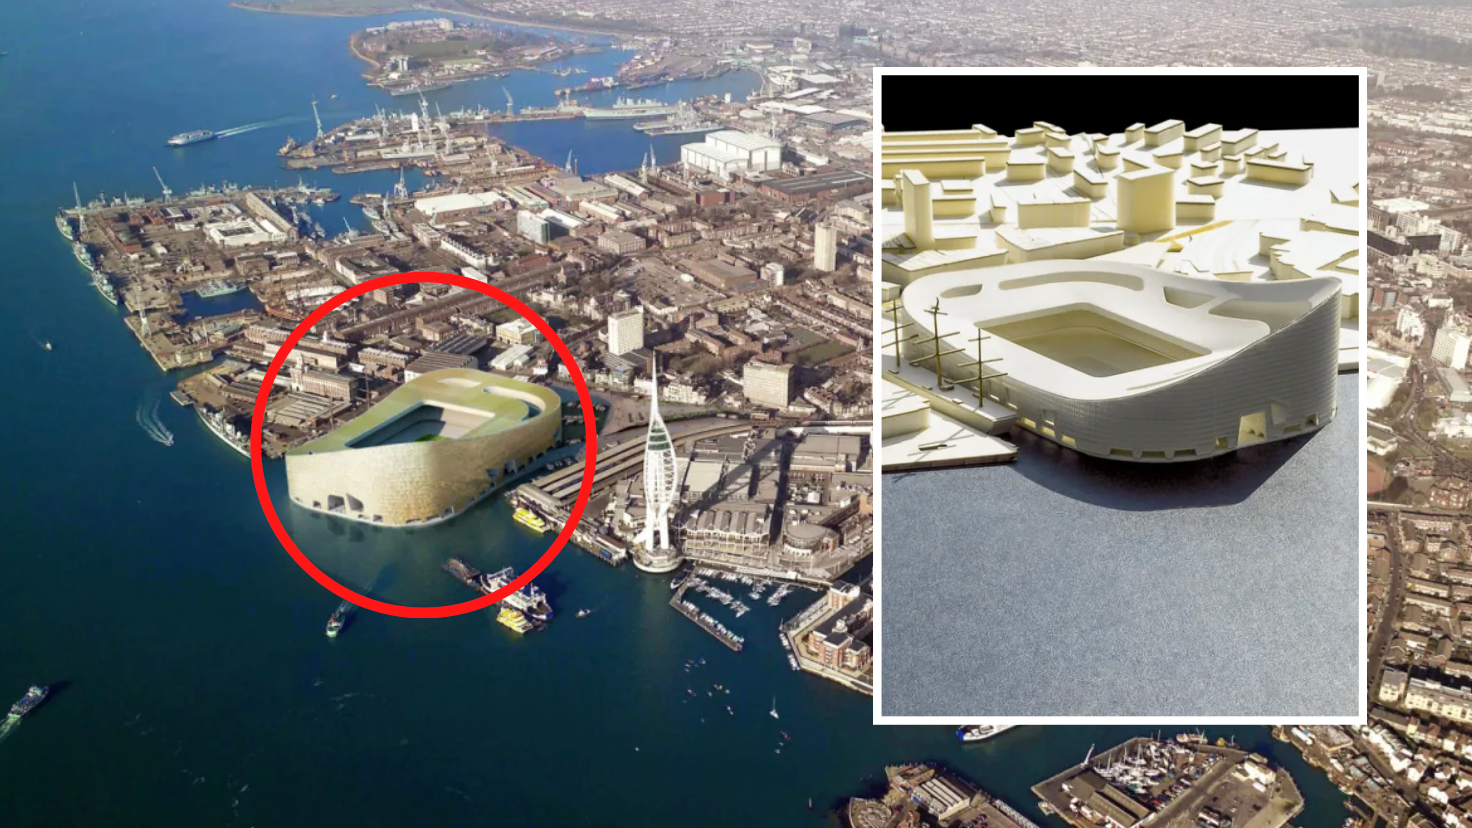 Former Premier League stadium that fell into disrepair is now an